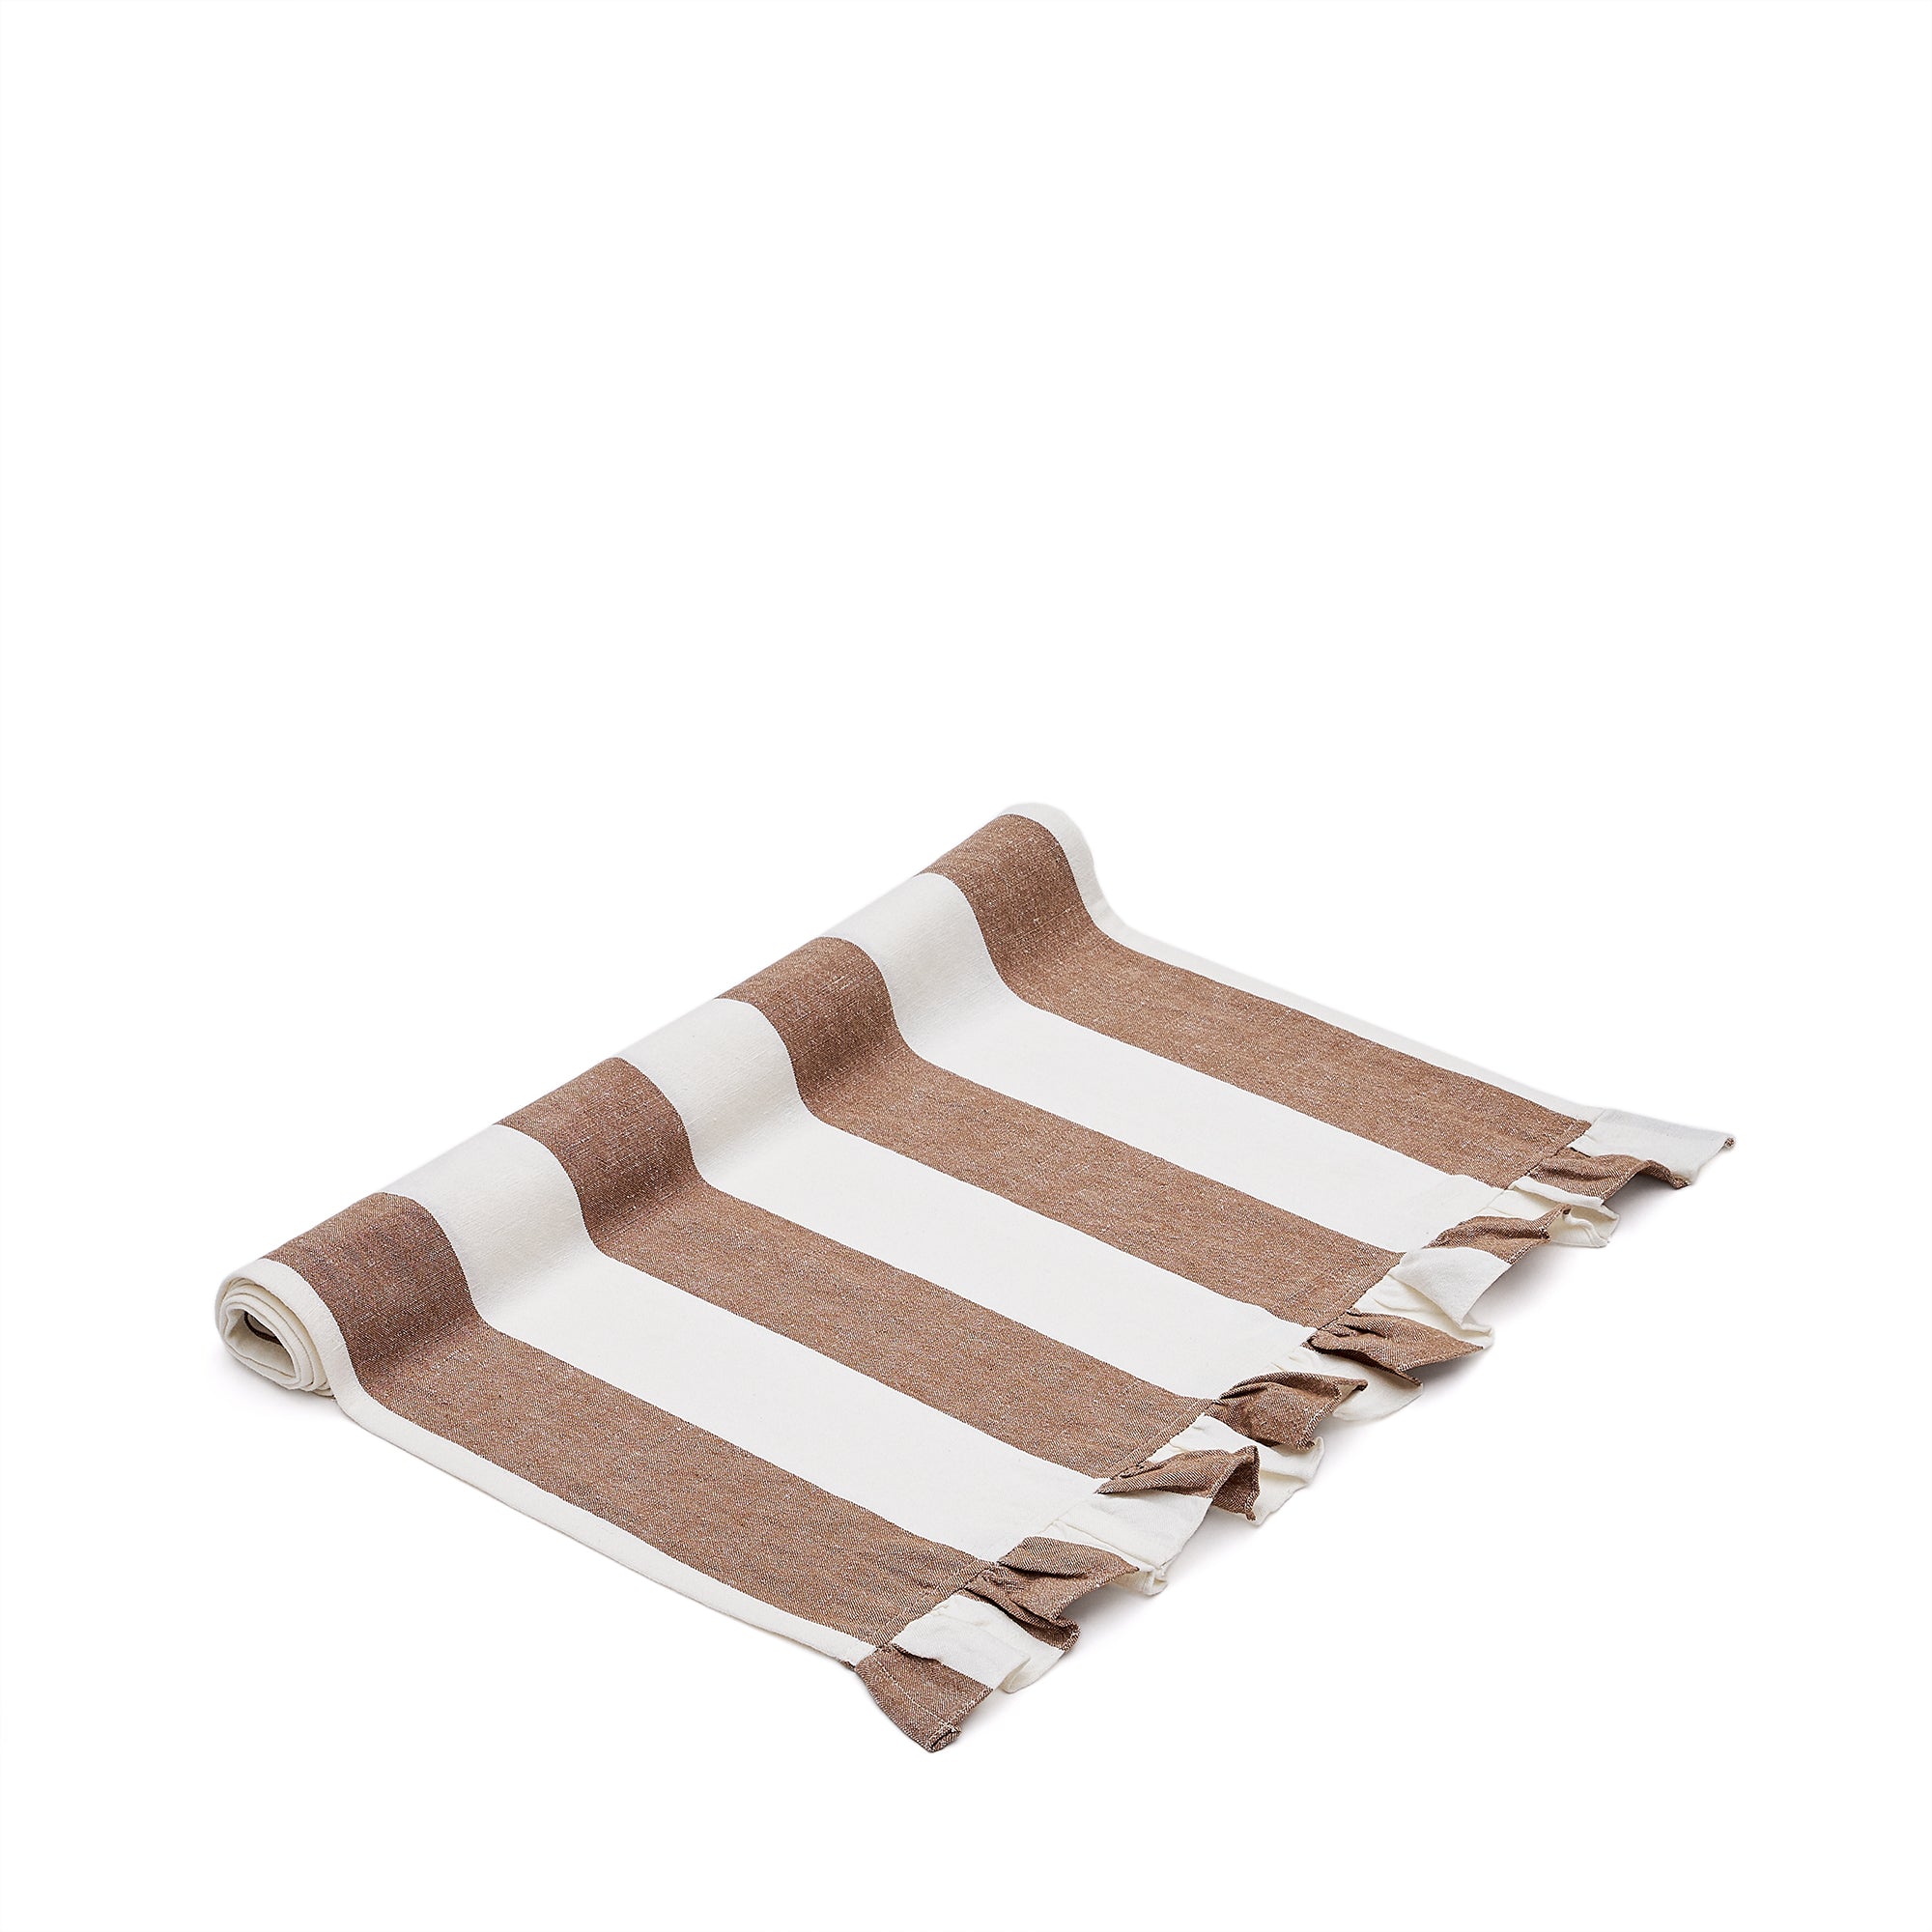 Maura cotton and linen table runner with white and brown stripes and side ruffles 50 x 150cm